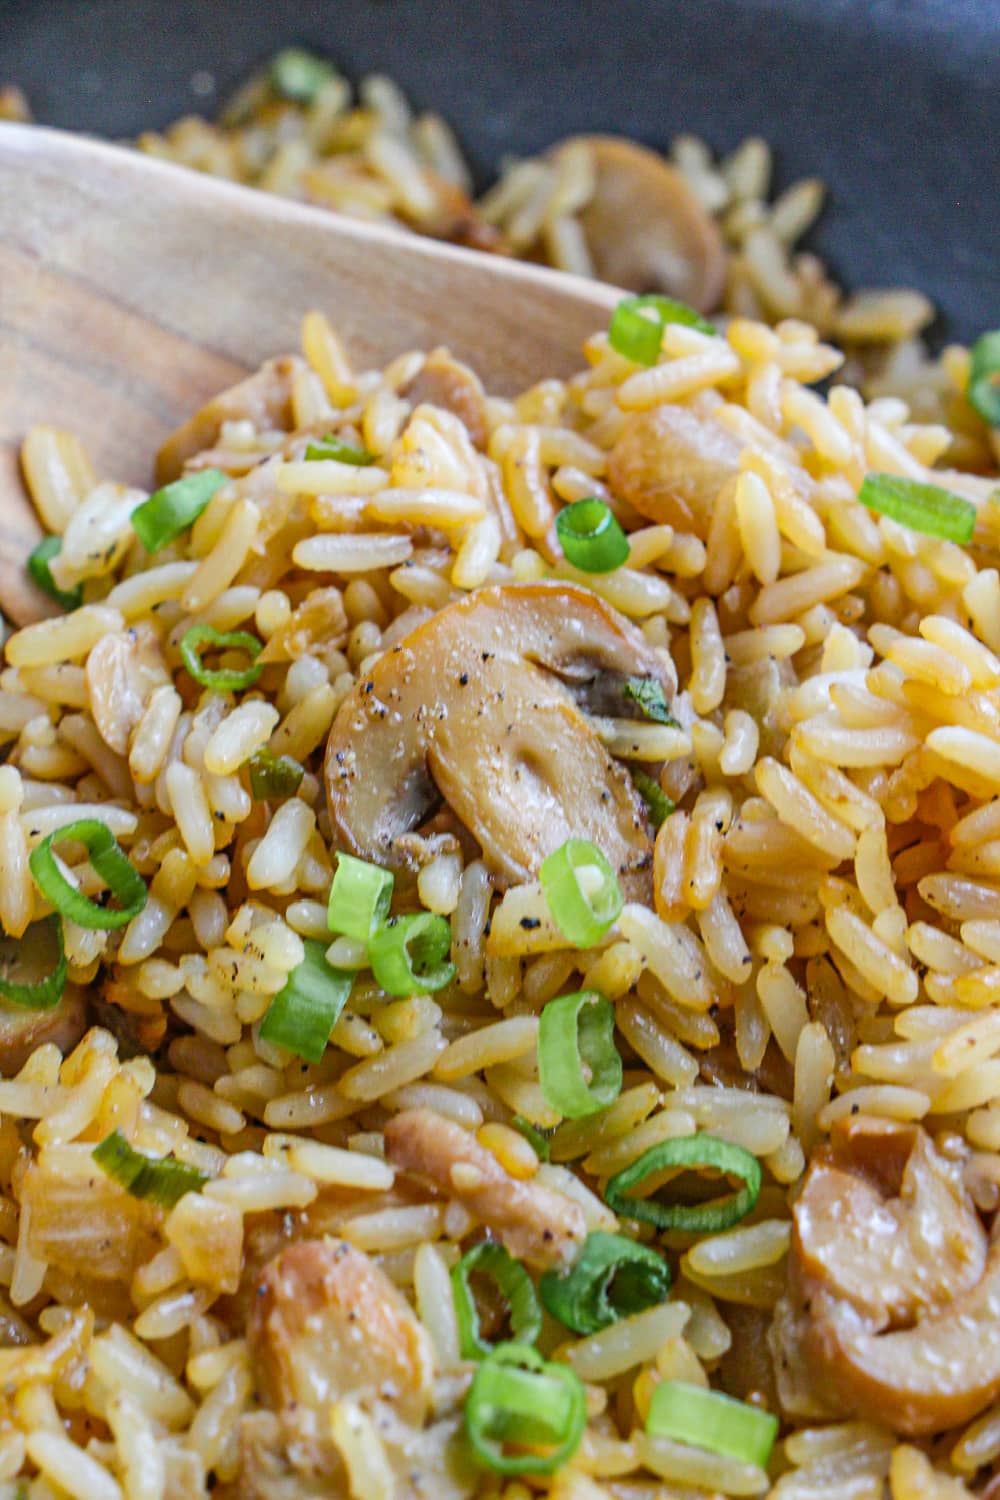 A close up photo of fried rice with mushroom and sliced green onion ins a wooden spoon.